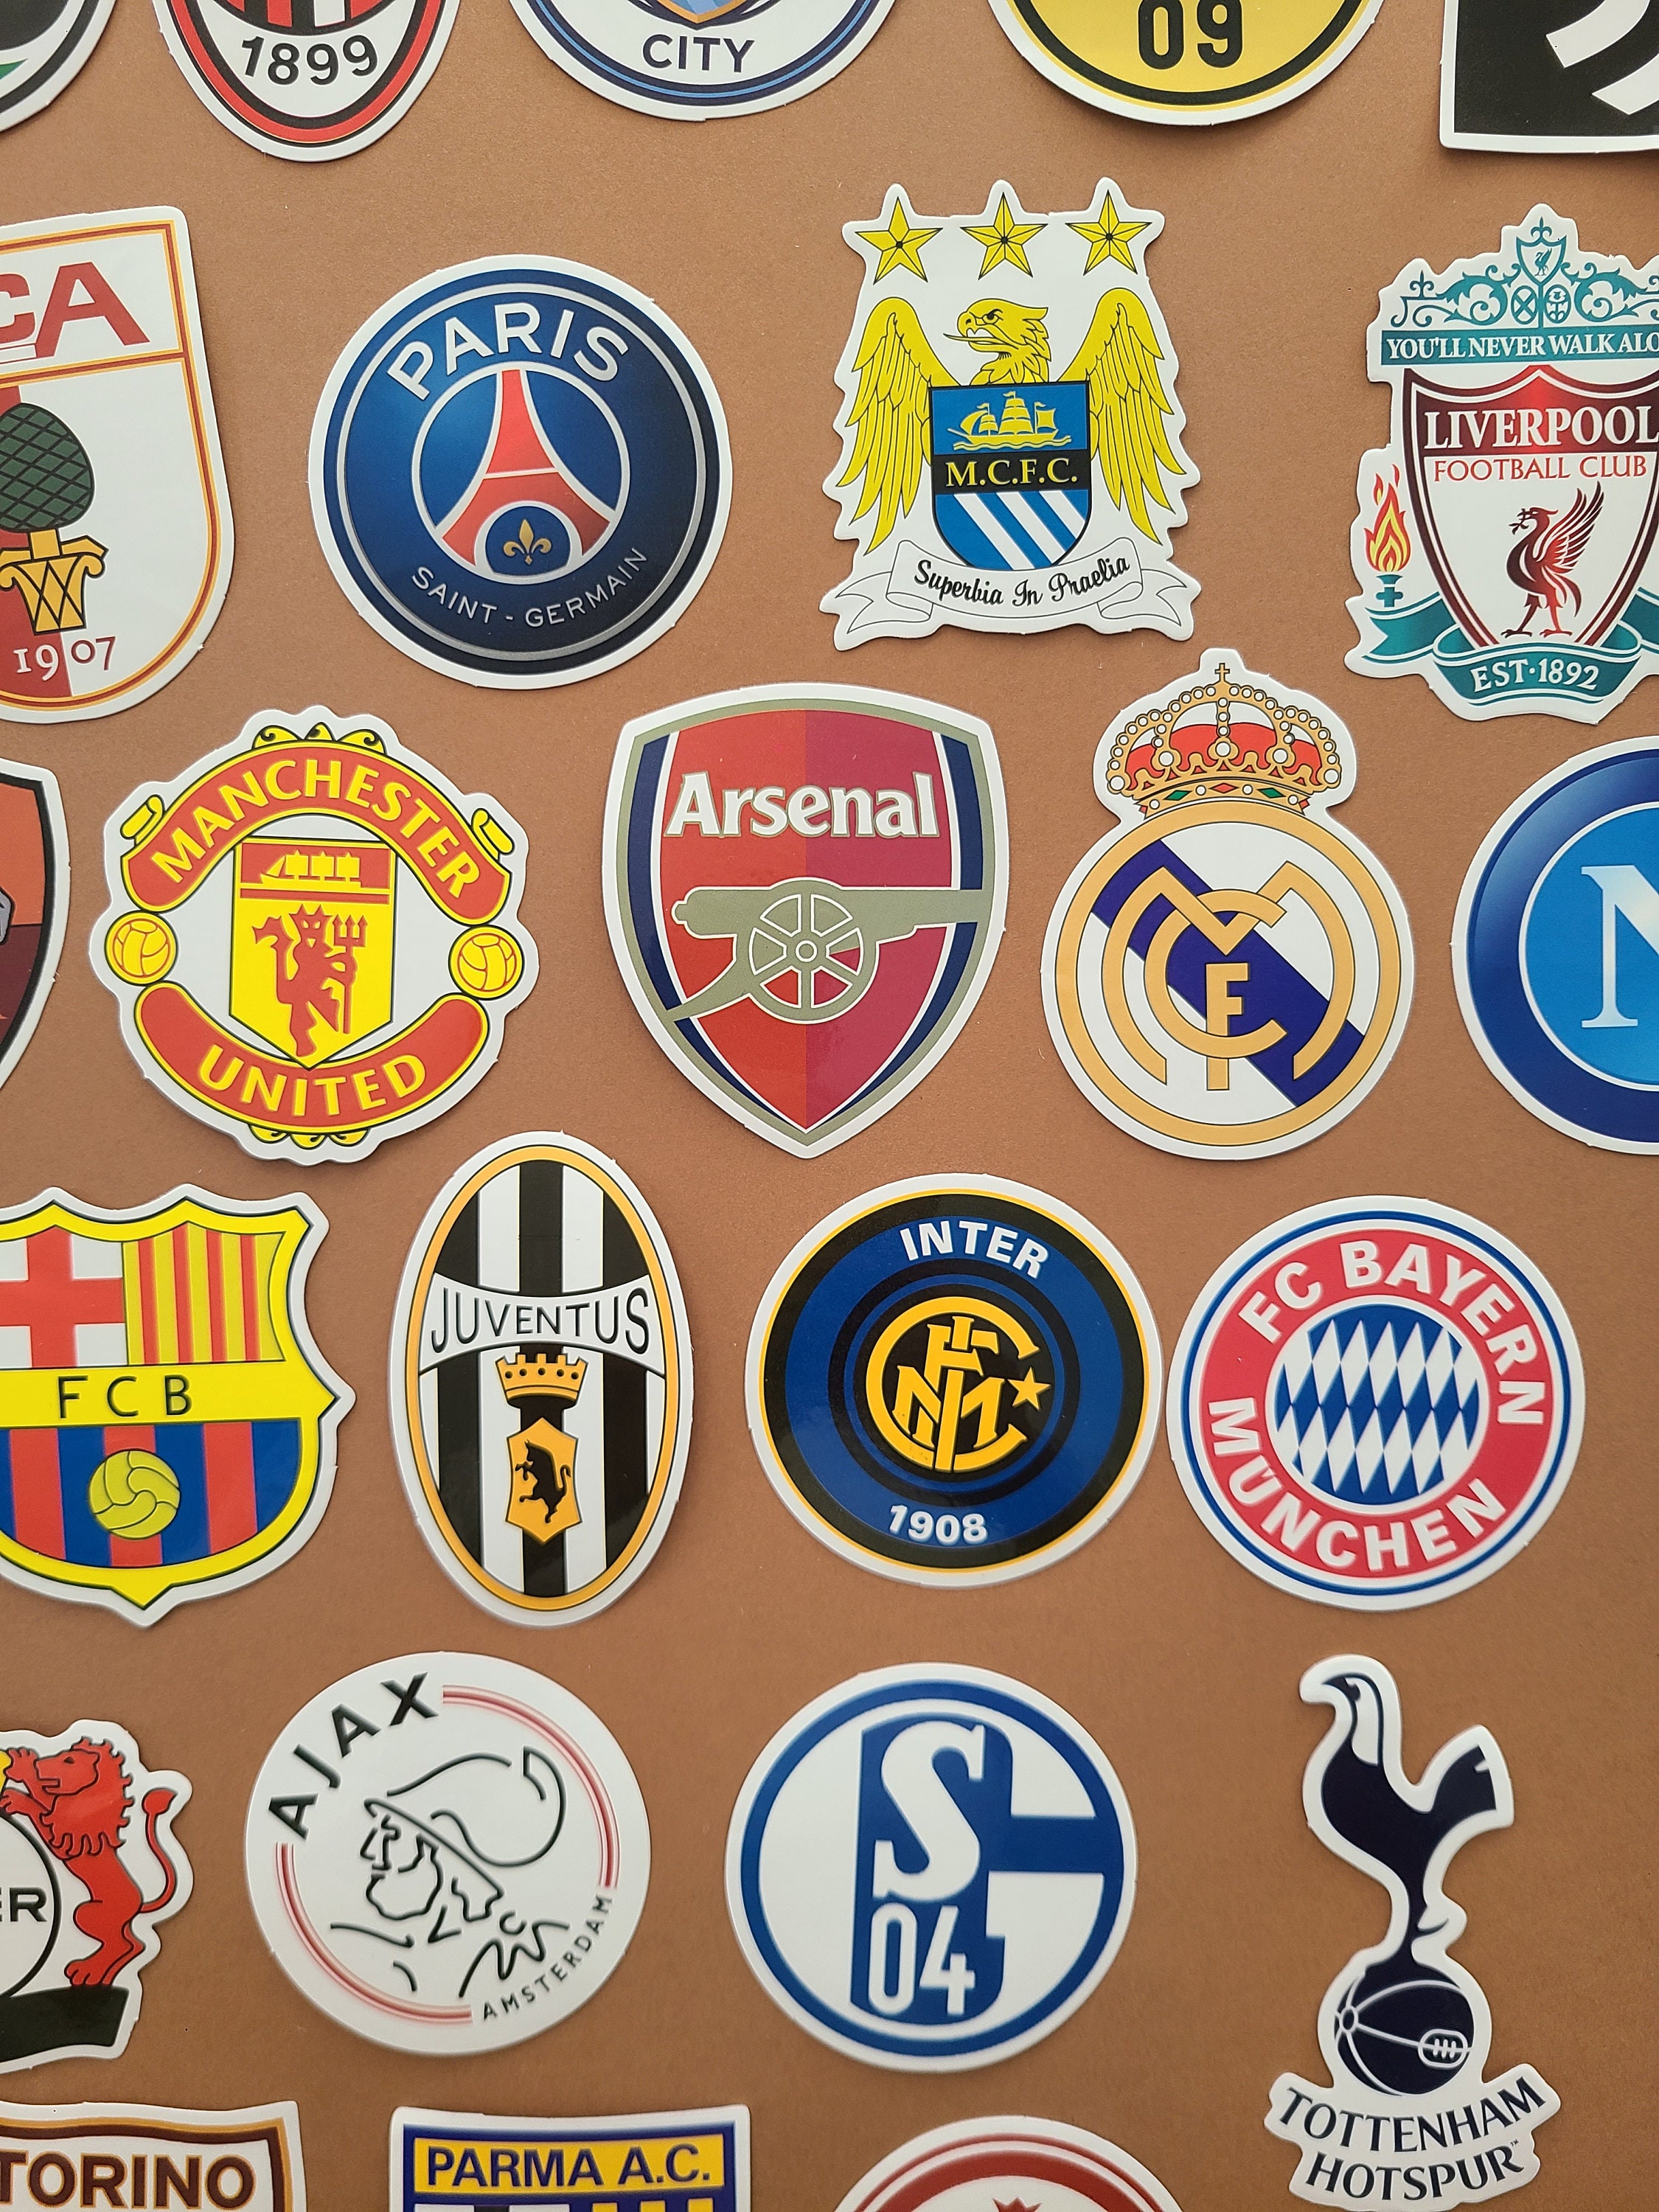 Psg stickers -  France